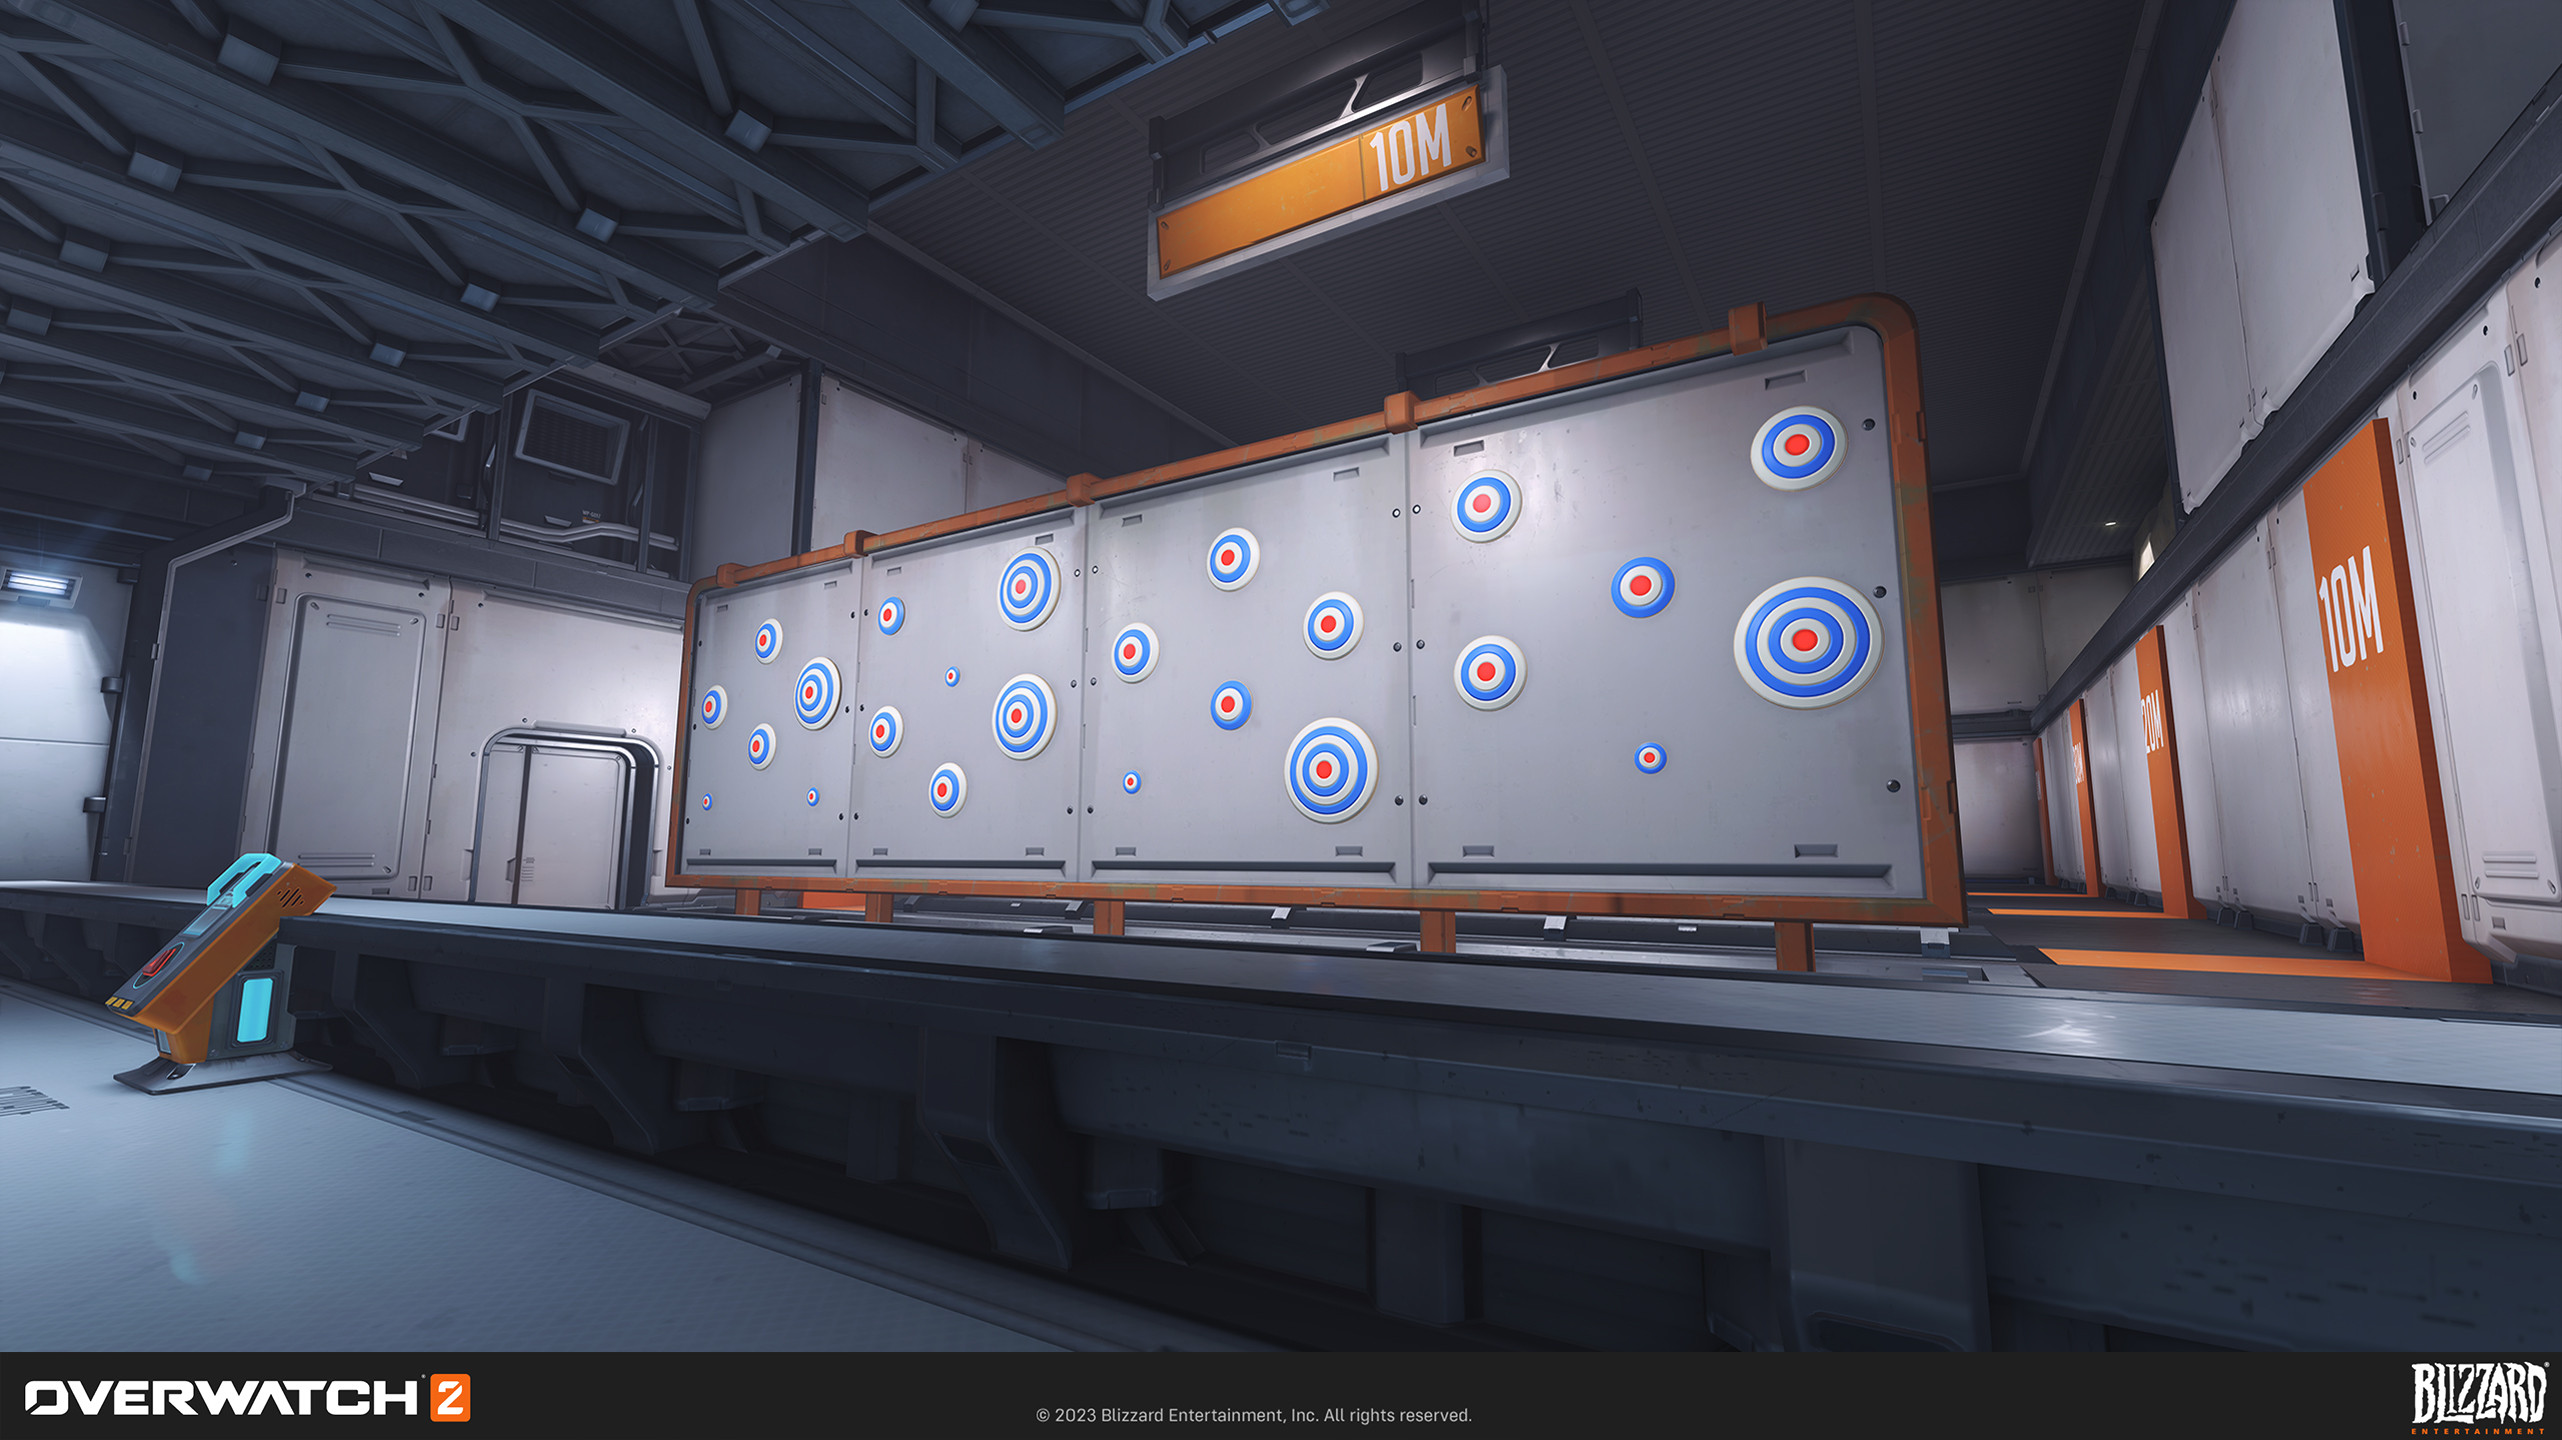 Training Range Targets: I worked with Cory Stockton on the gameplay team to create a few breakable targets. Shown in the context of the Practice Training Range.